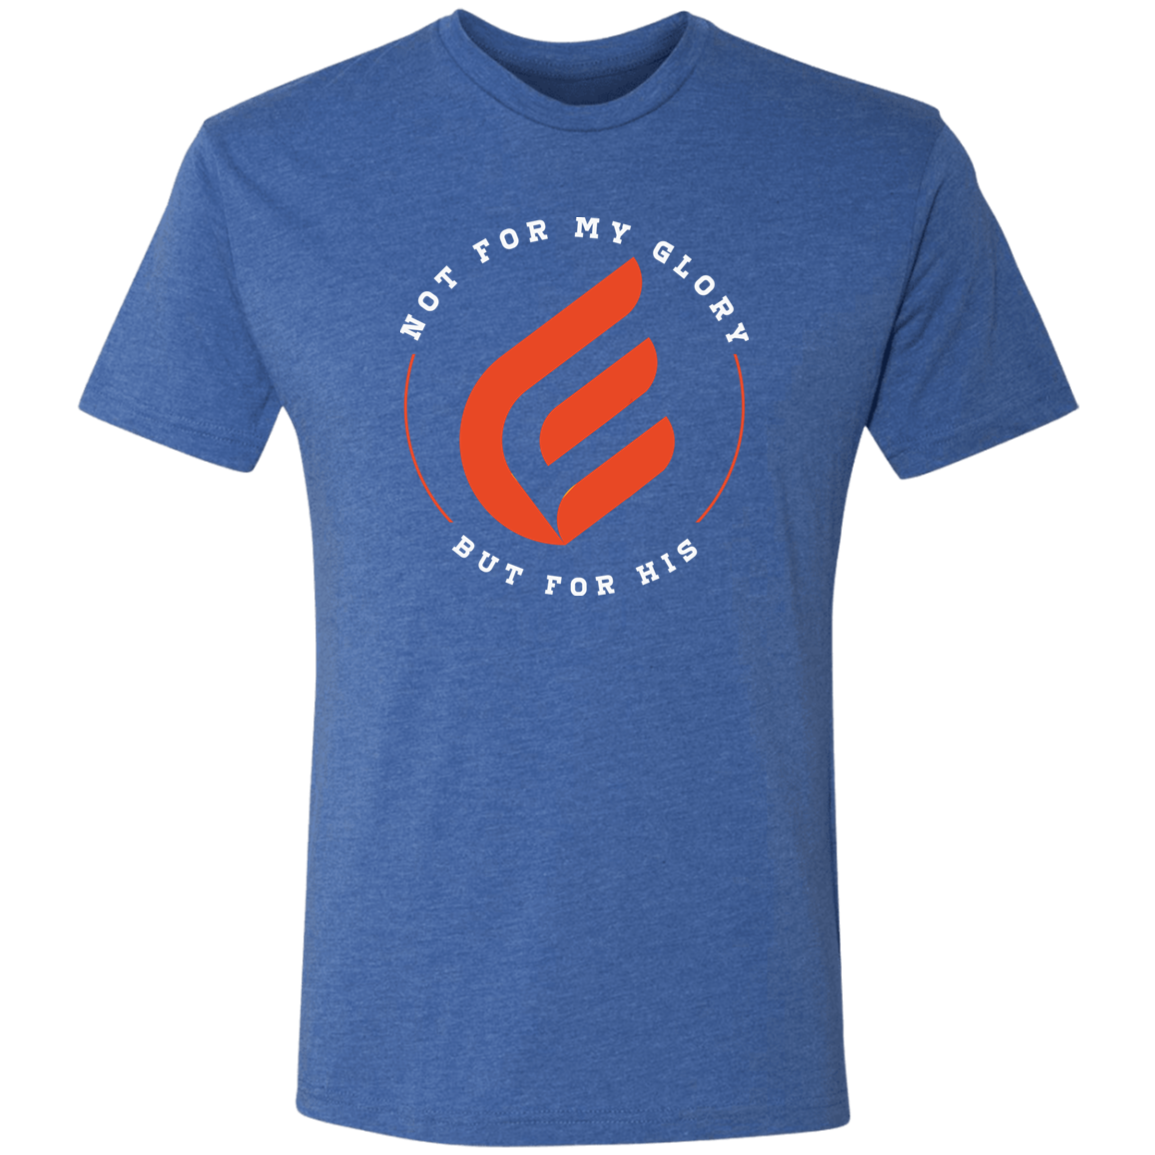 For His Glory | Men’s Triblend T-Shirt